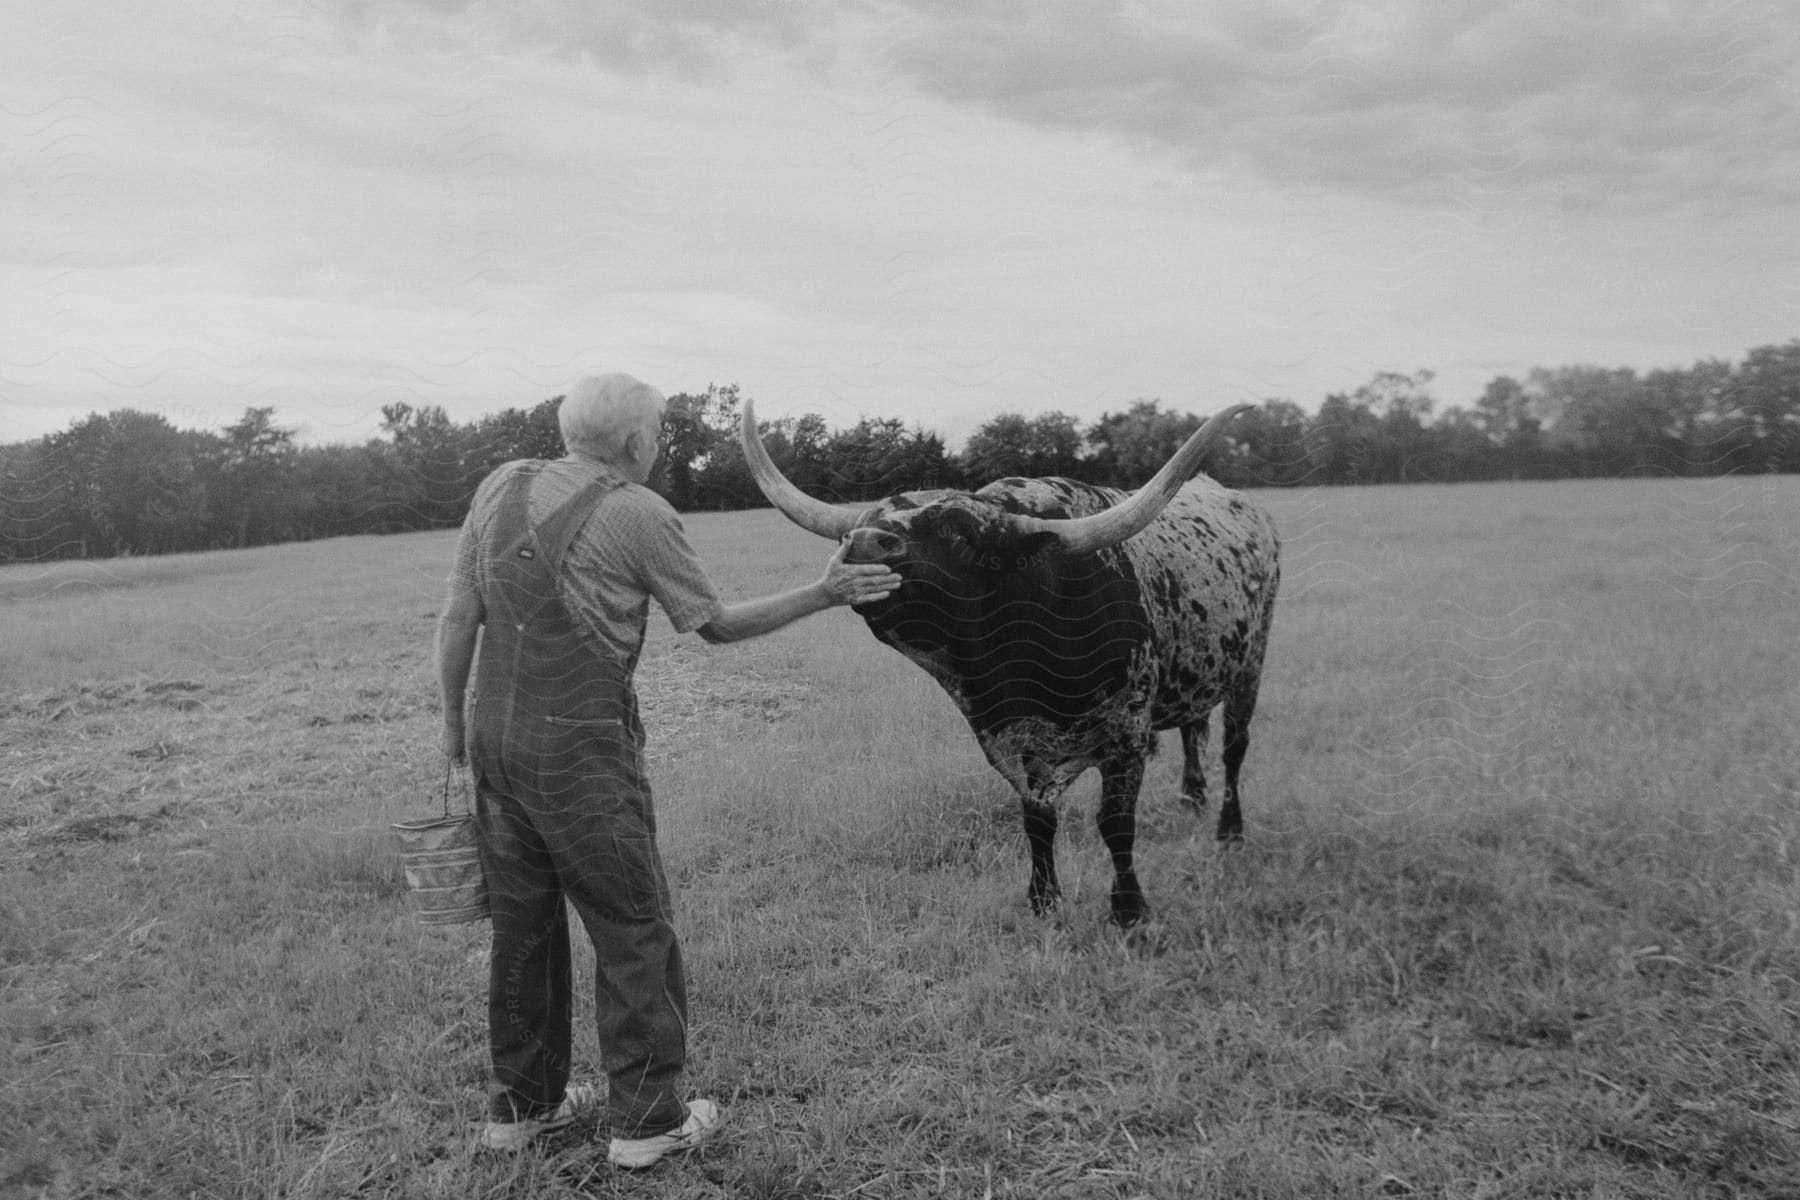 A shepherd feeding his cow in black and white outdoors during spring or summer